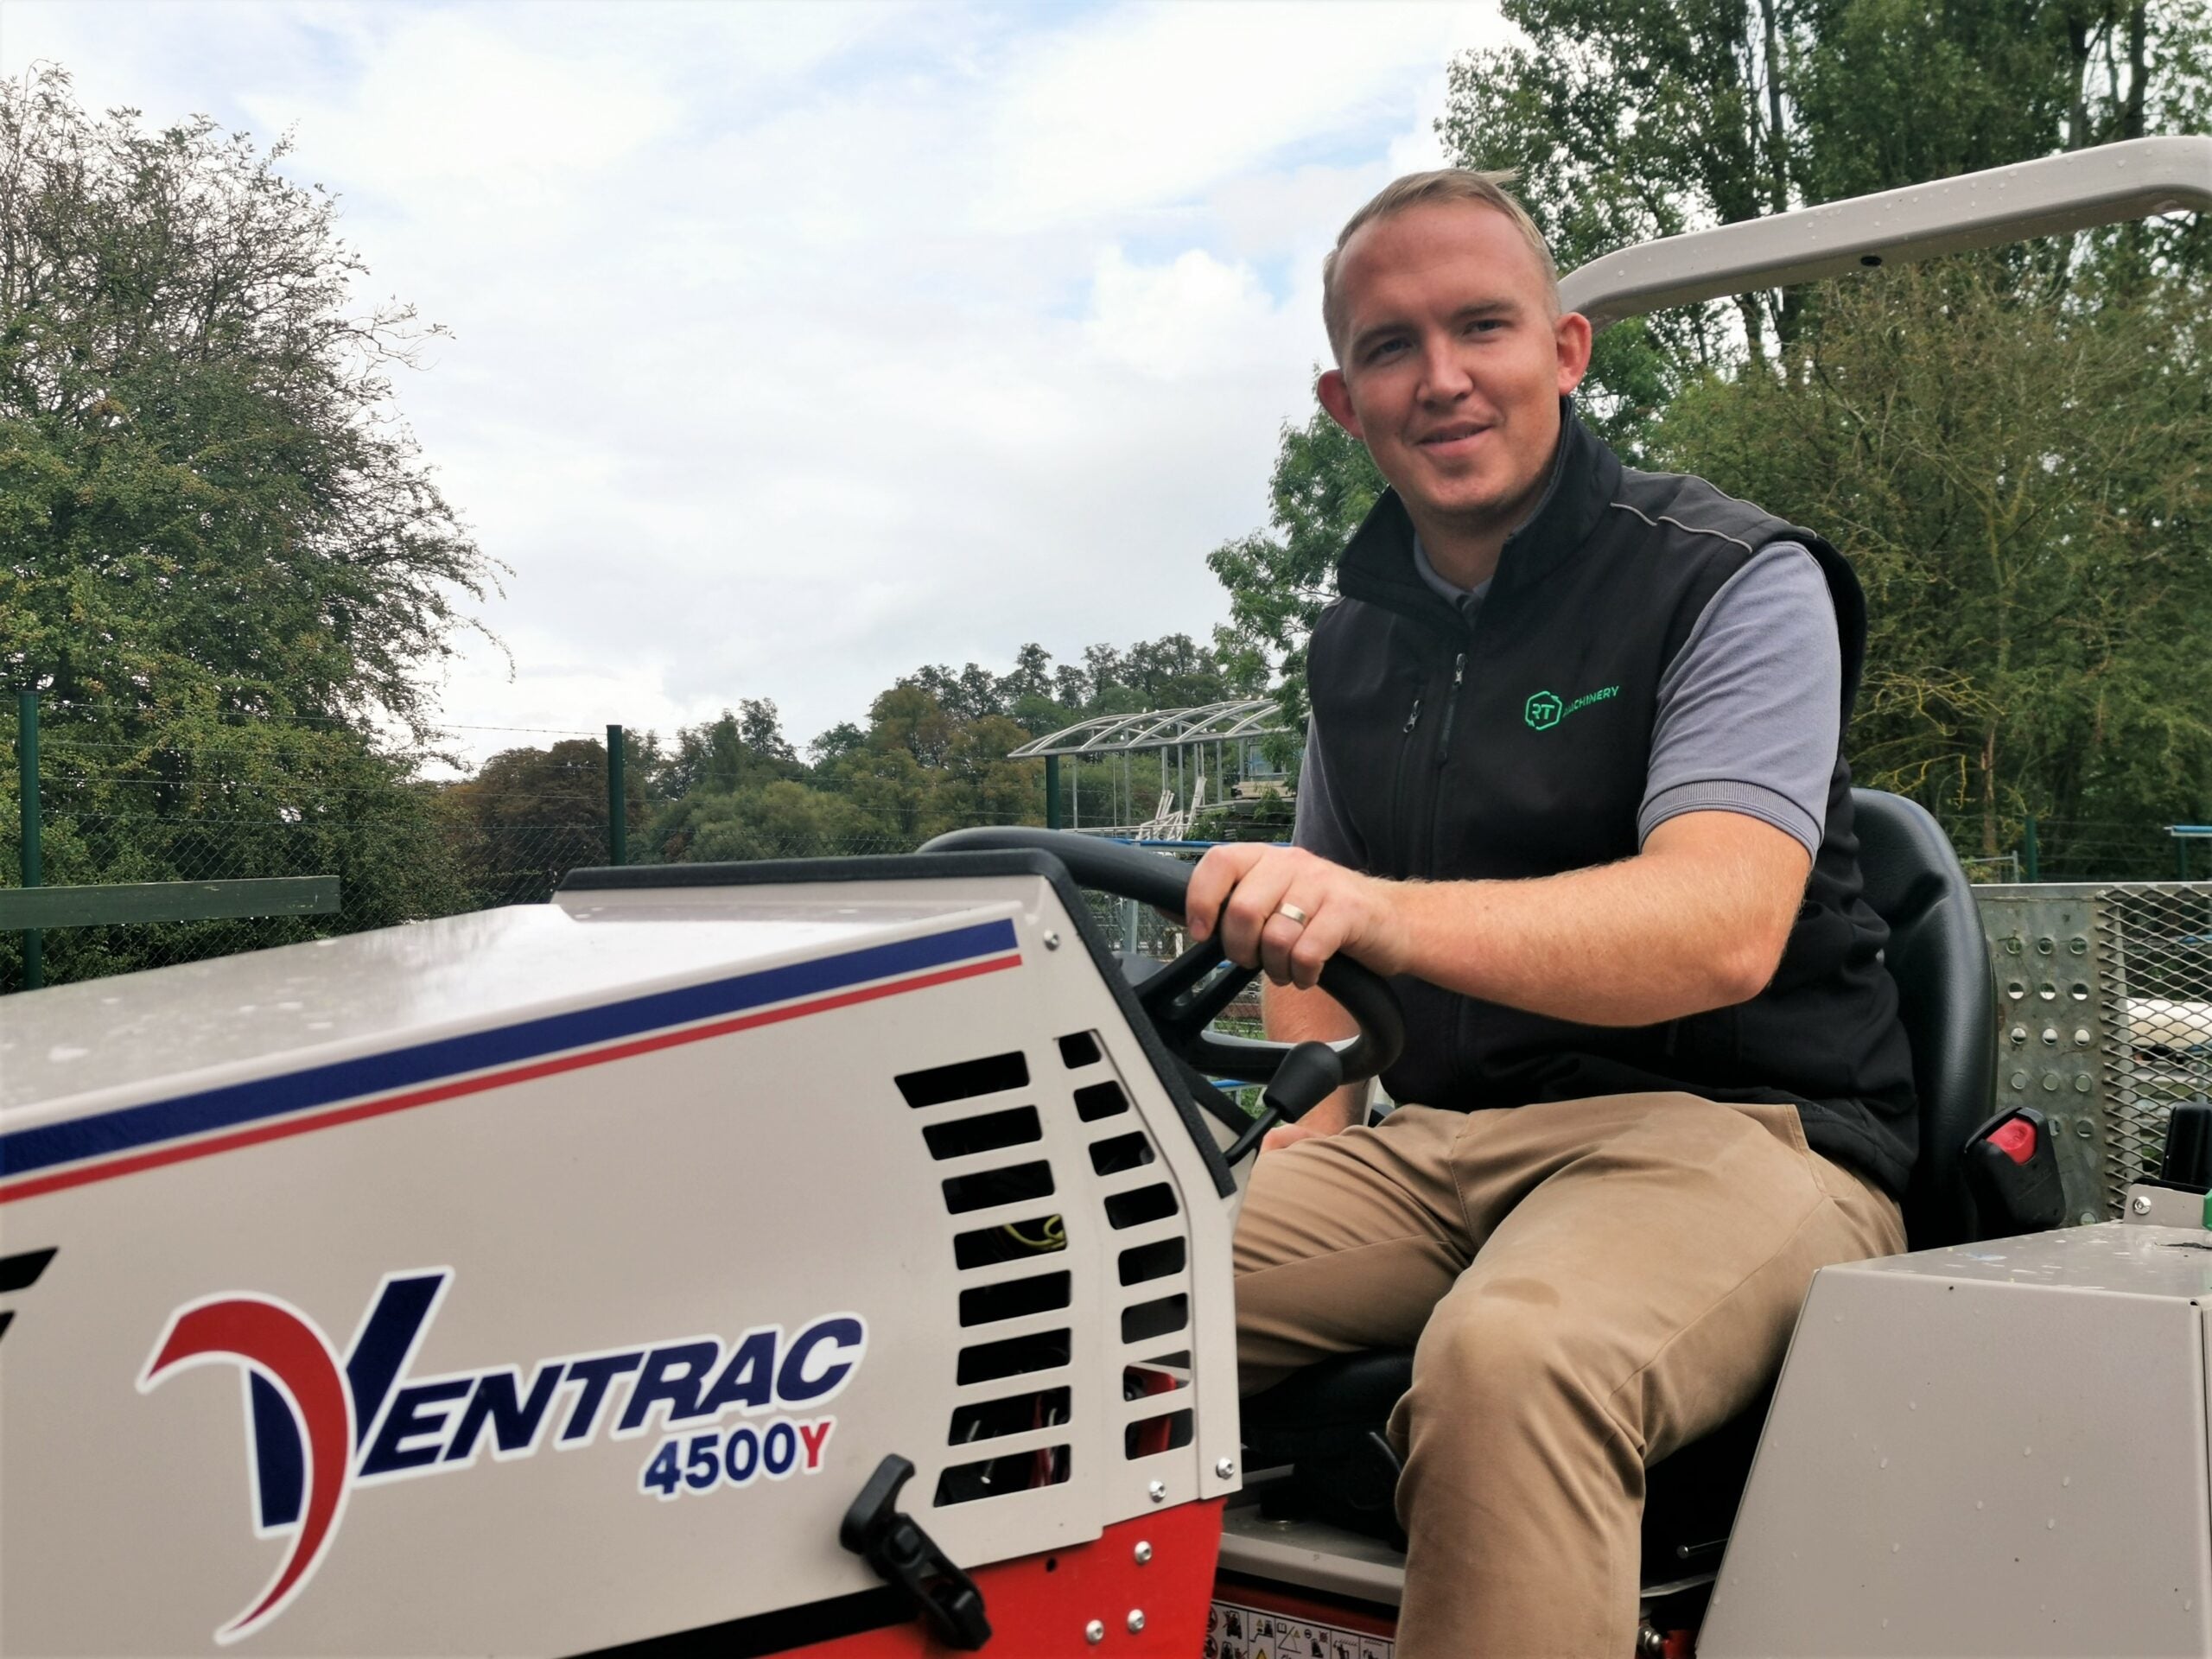 Price Turfcare appoints new area sales manager